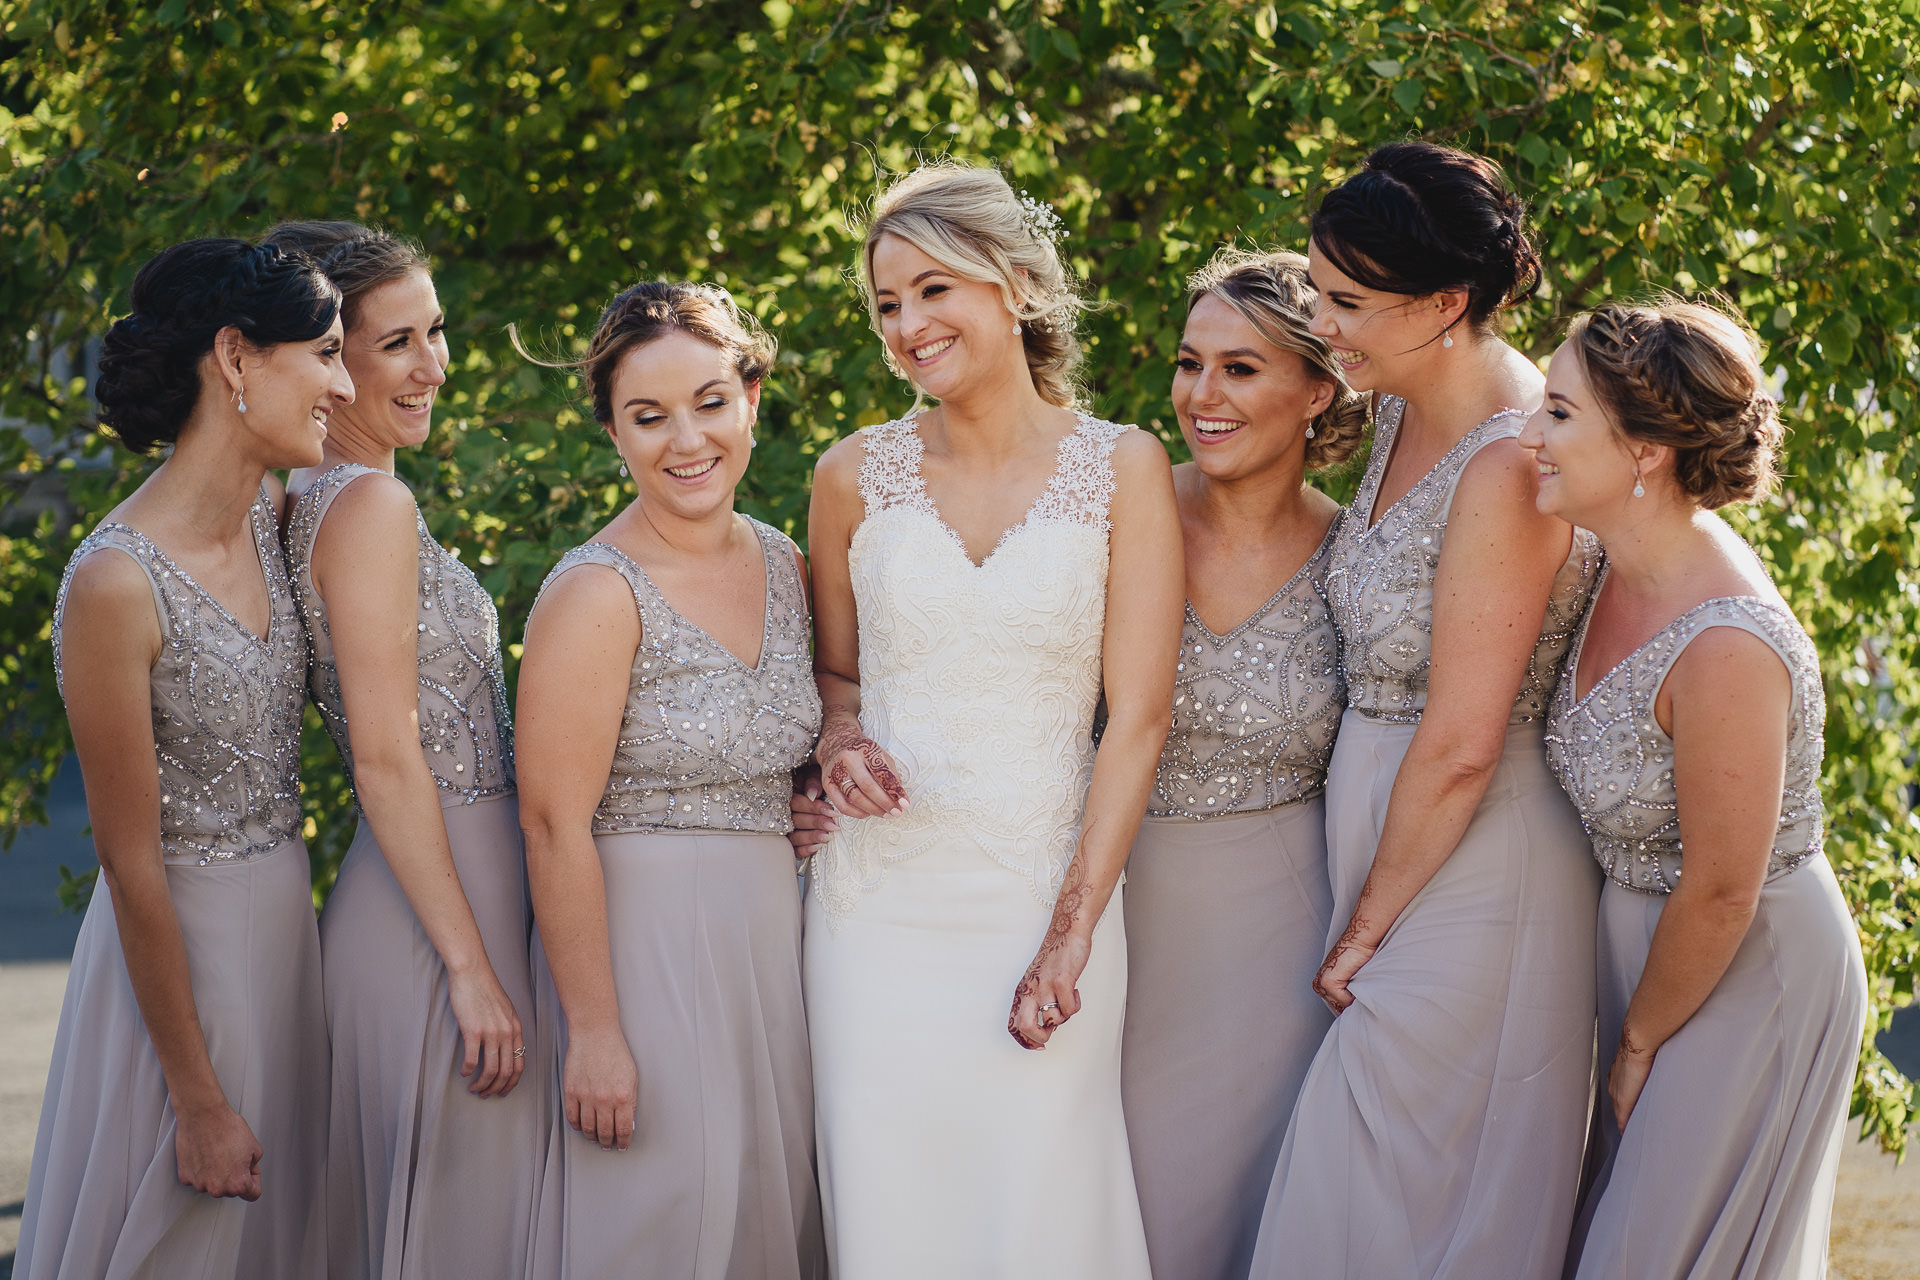 BRide and bridesmaids laughing together